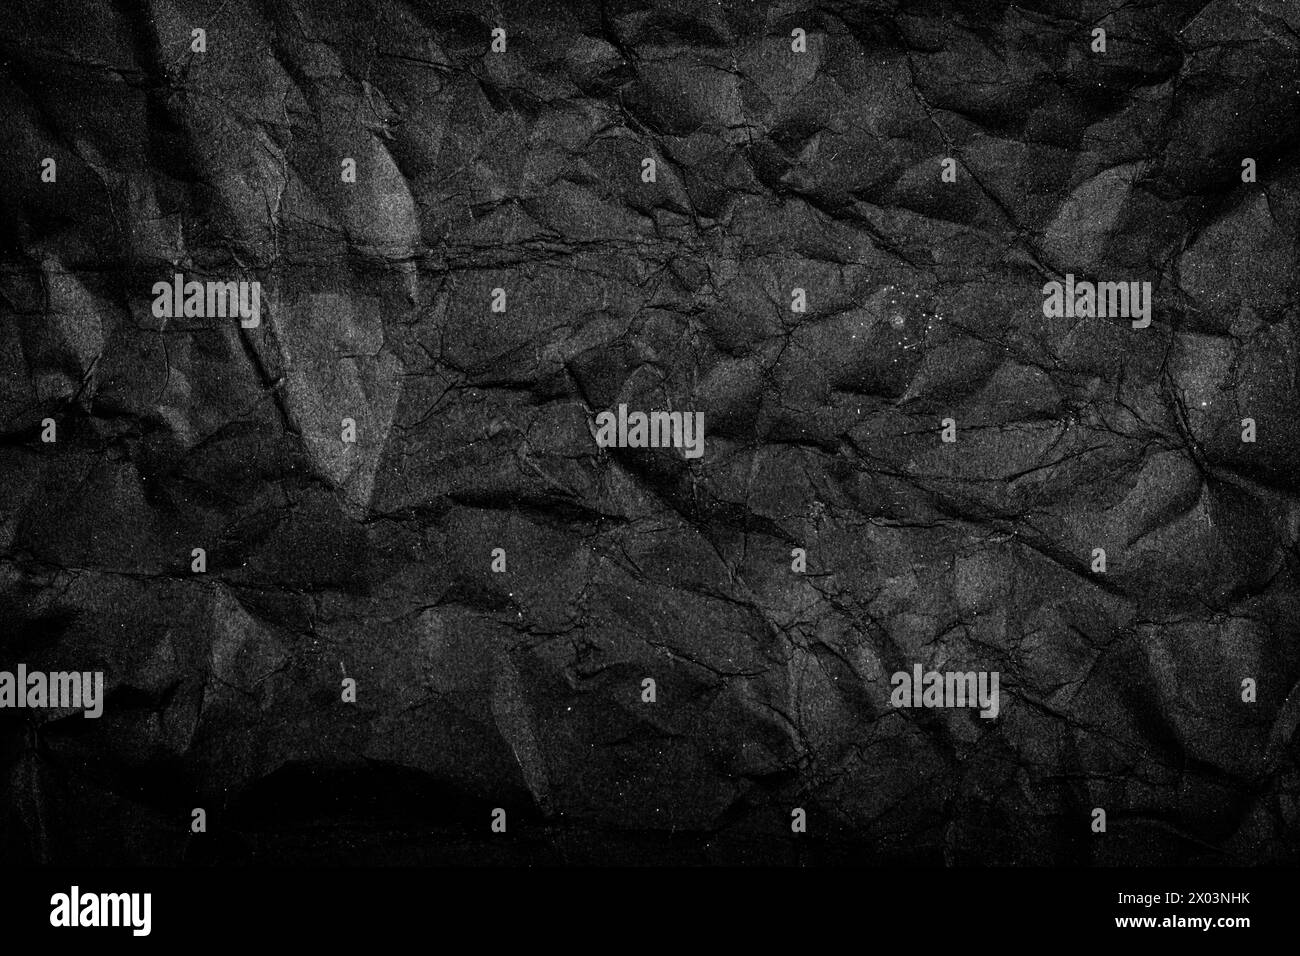 Black Paper Texture background. Crumpled Black paper abstract shape background. Stock Photo